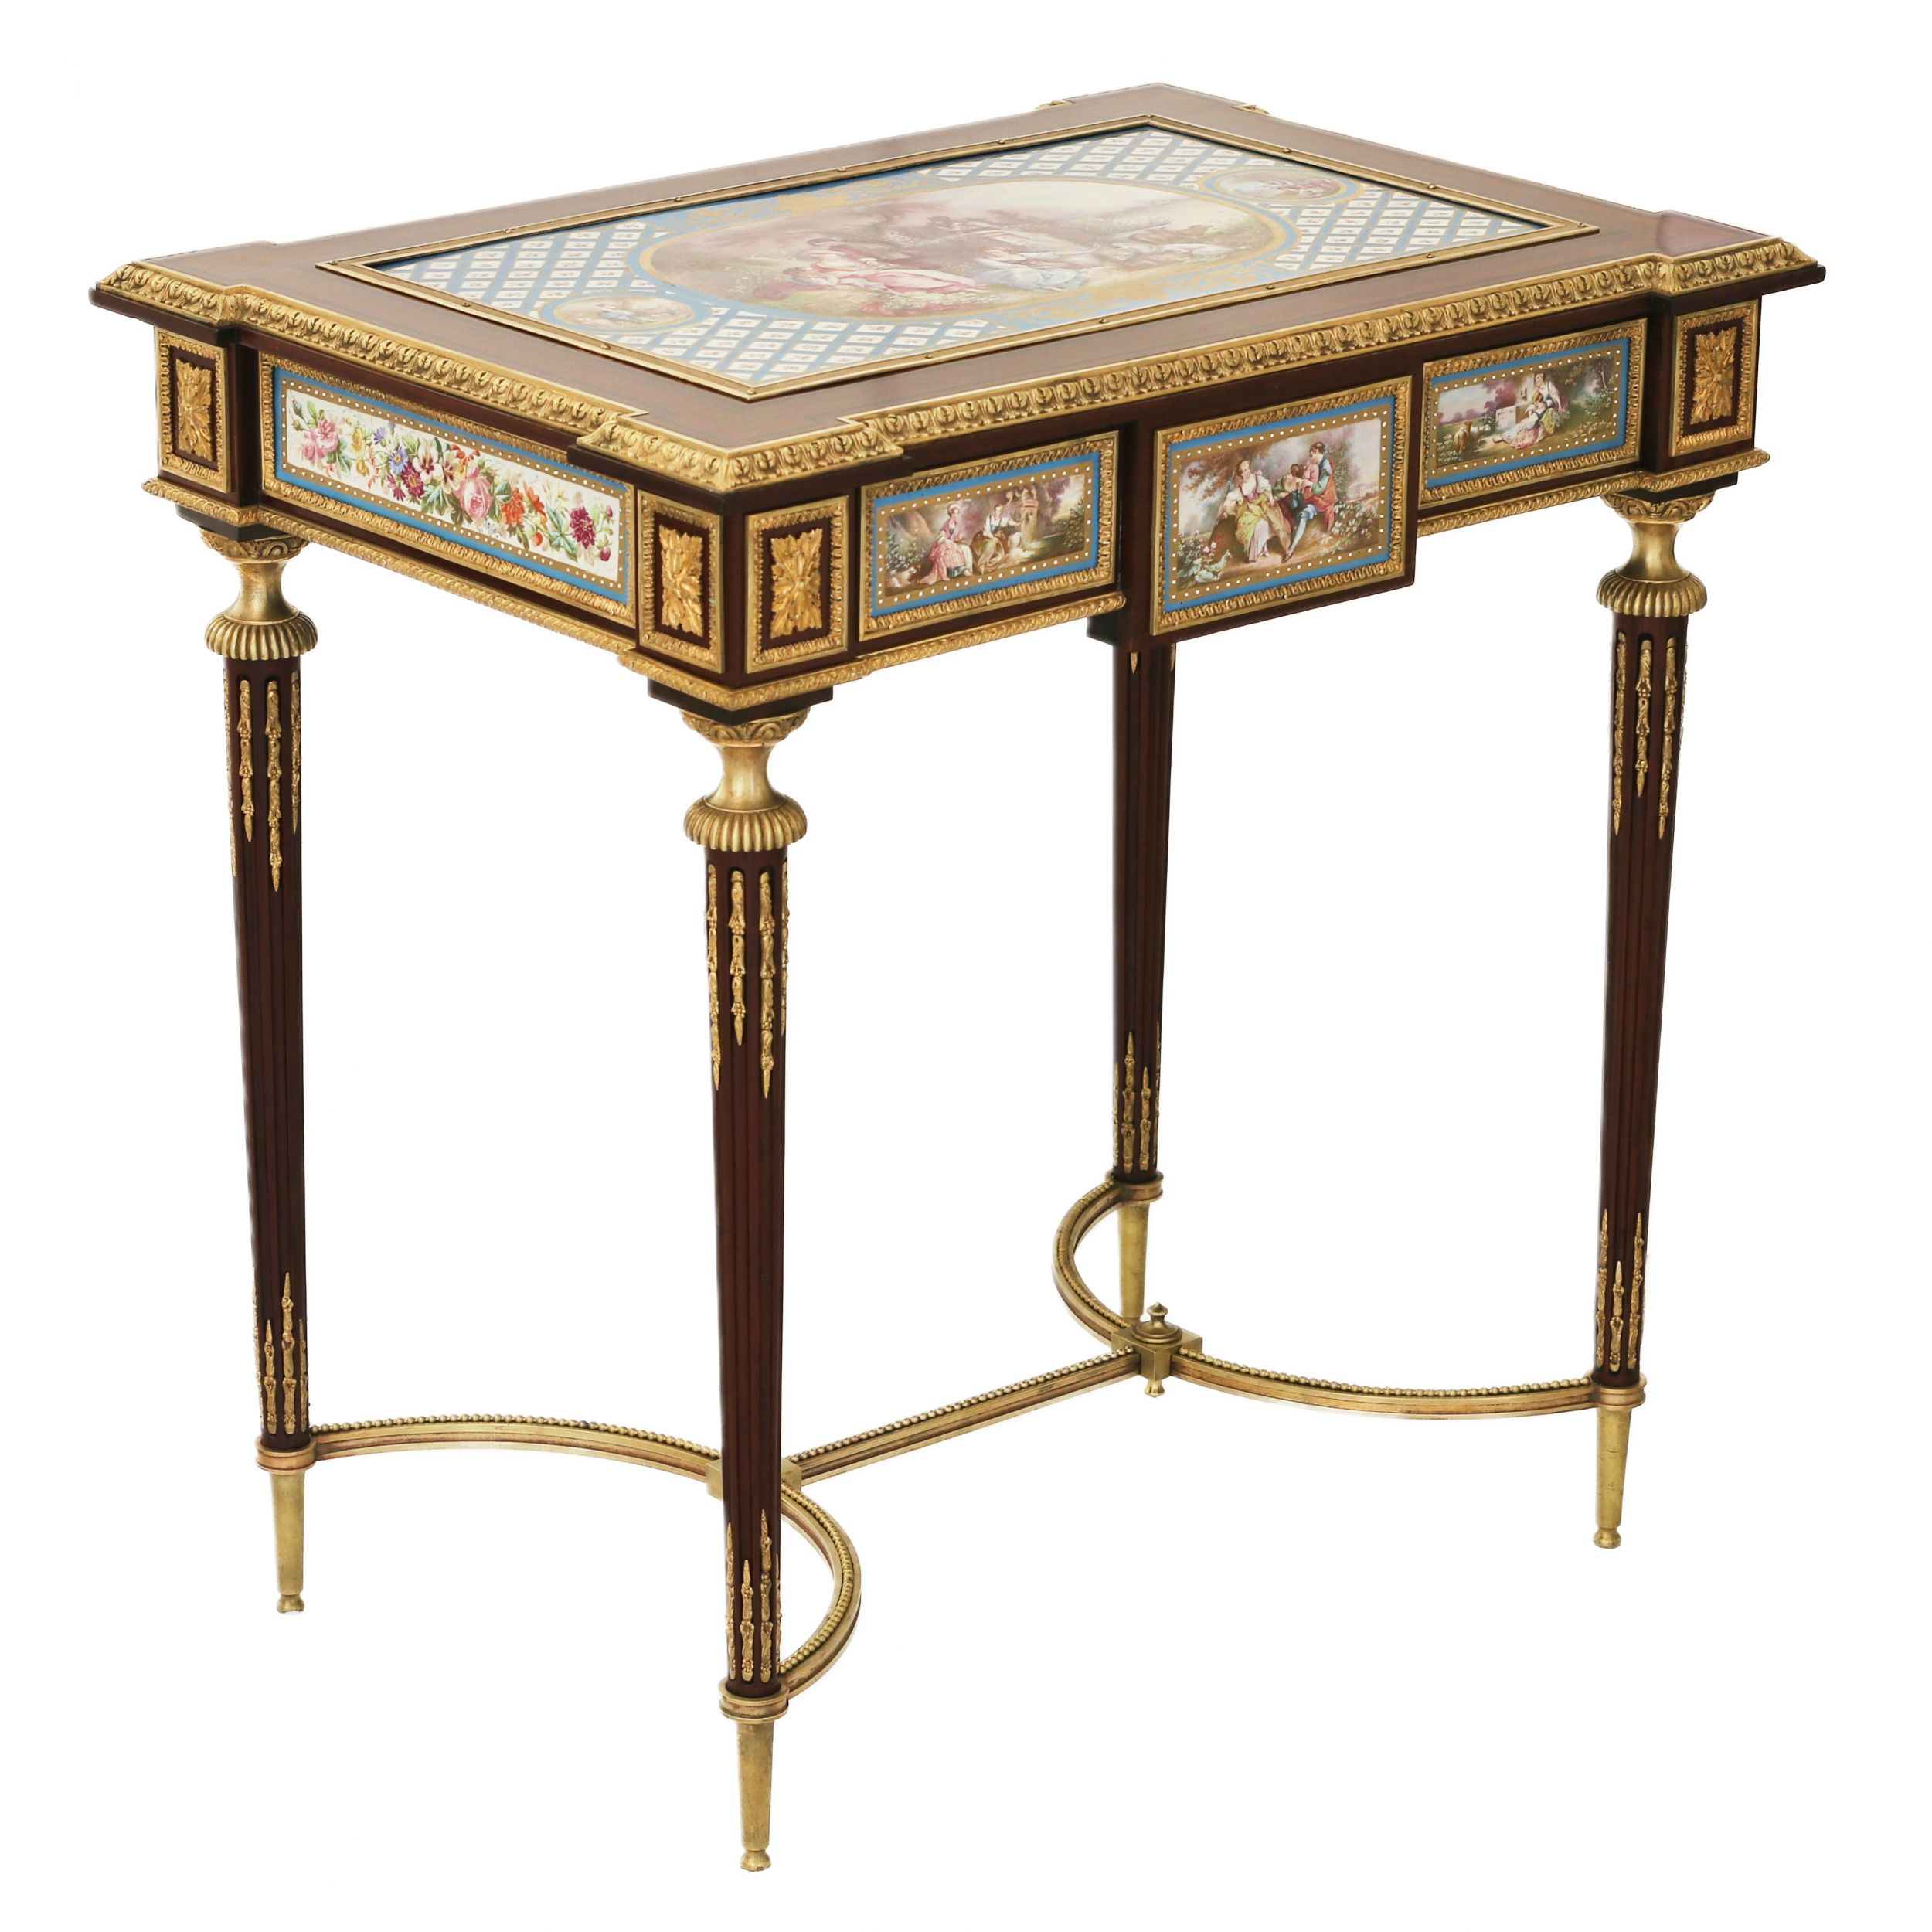 A magnificent ladies table with gilded bronze decor and porcelain panels in the style of Adam Weiswe